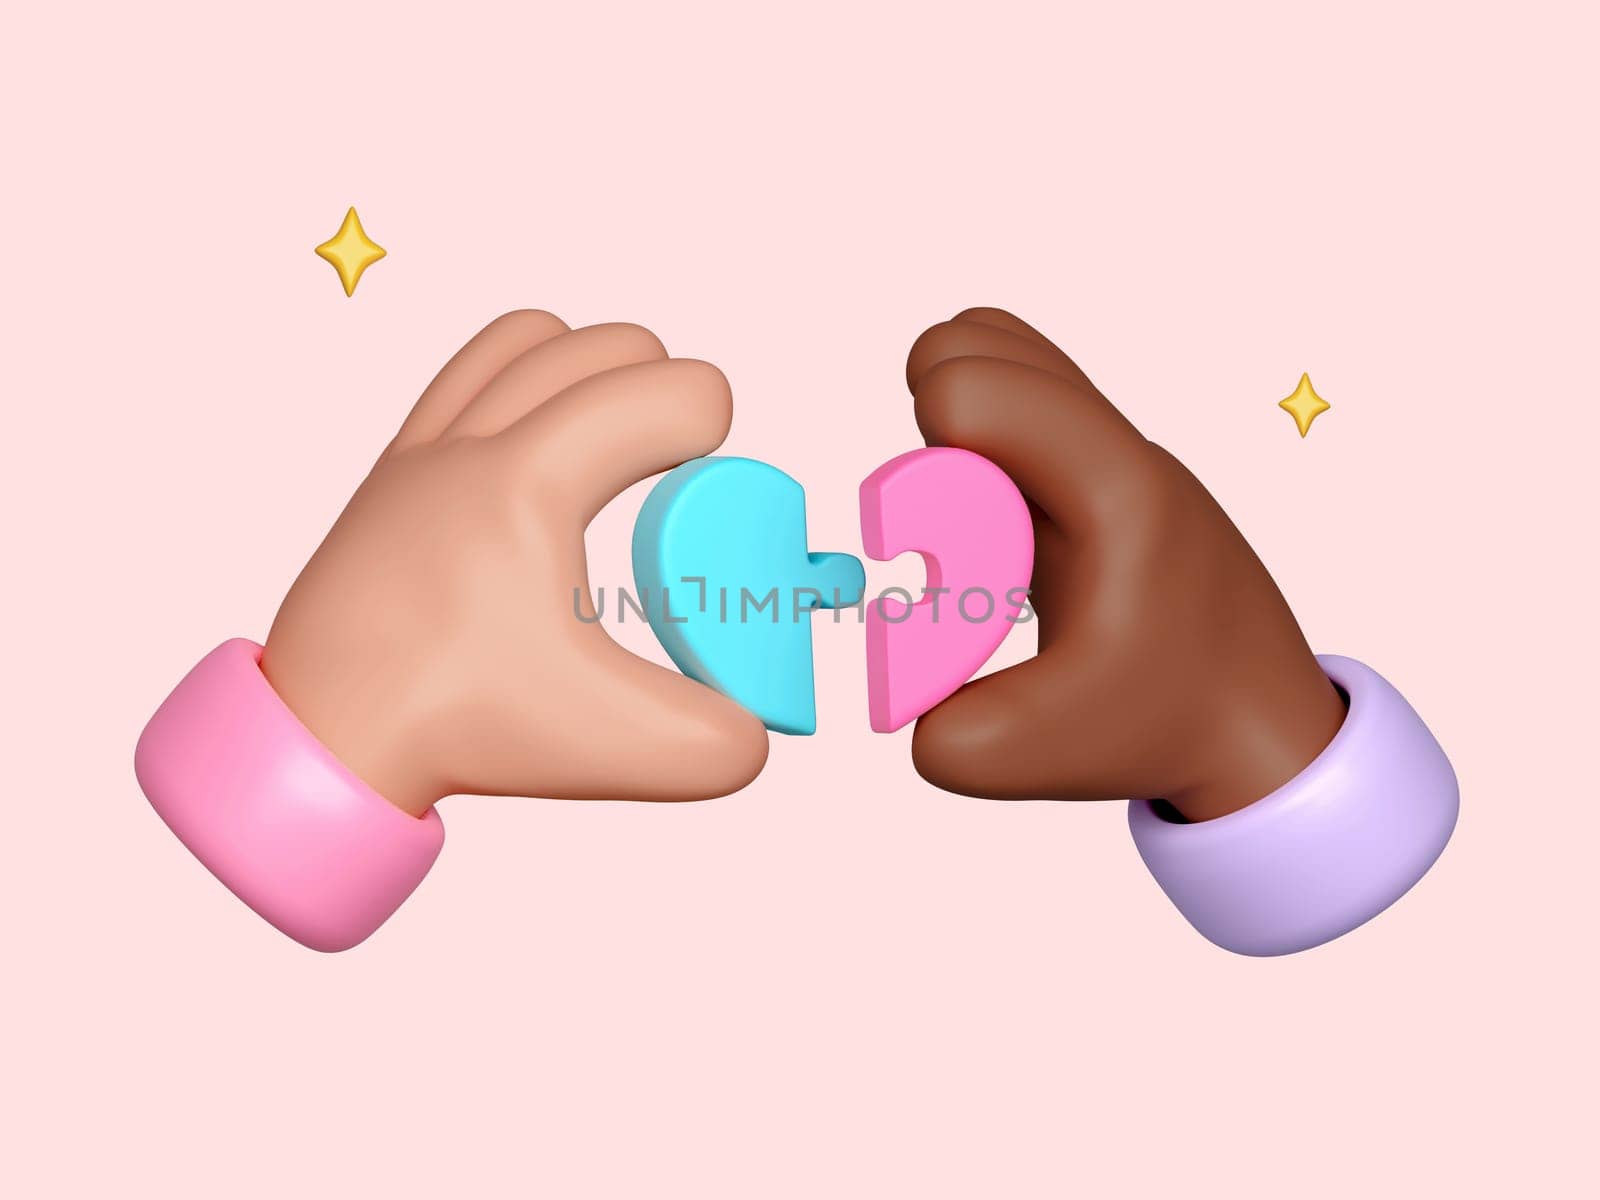 Cartoon Hand holding jigsaw puzzle heart shape, heart donate concept, world health day, charity donation, isolated on pink background, 3D render illustration by meepiangraphic